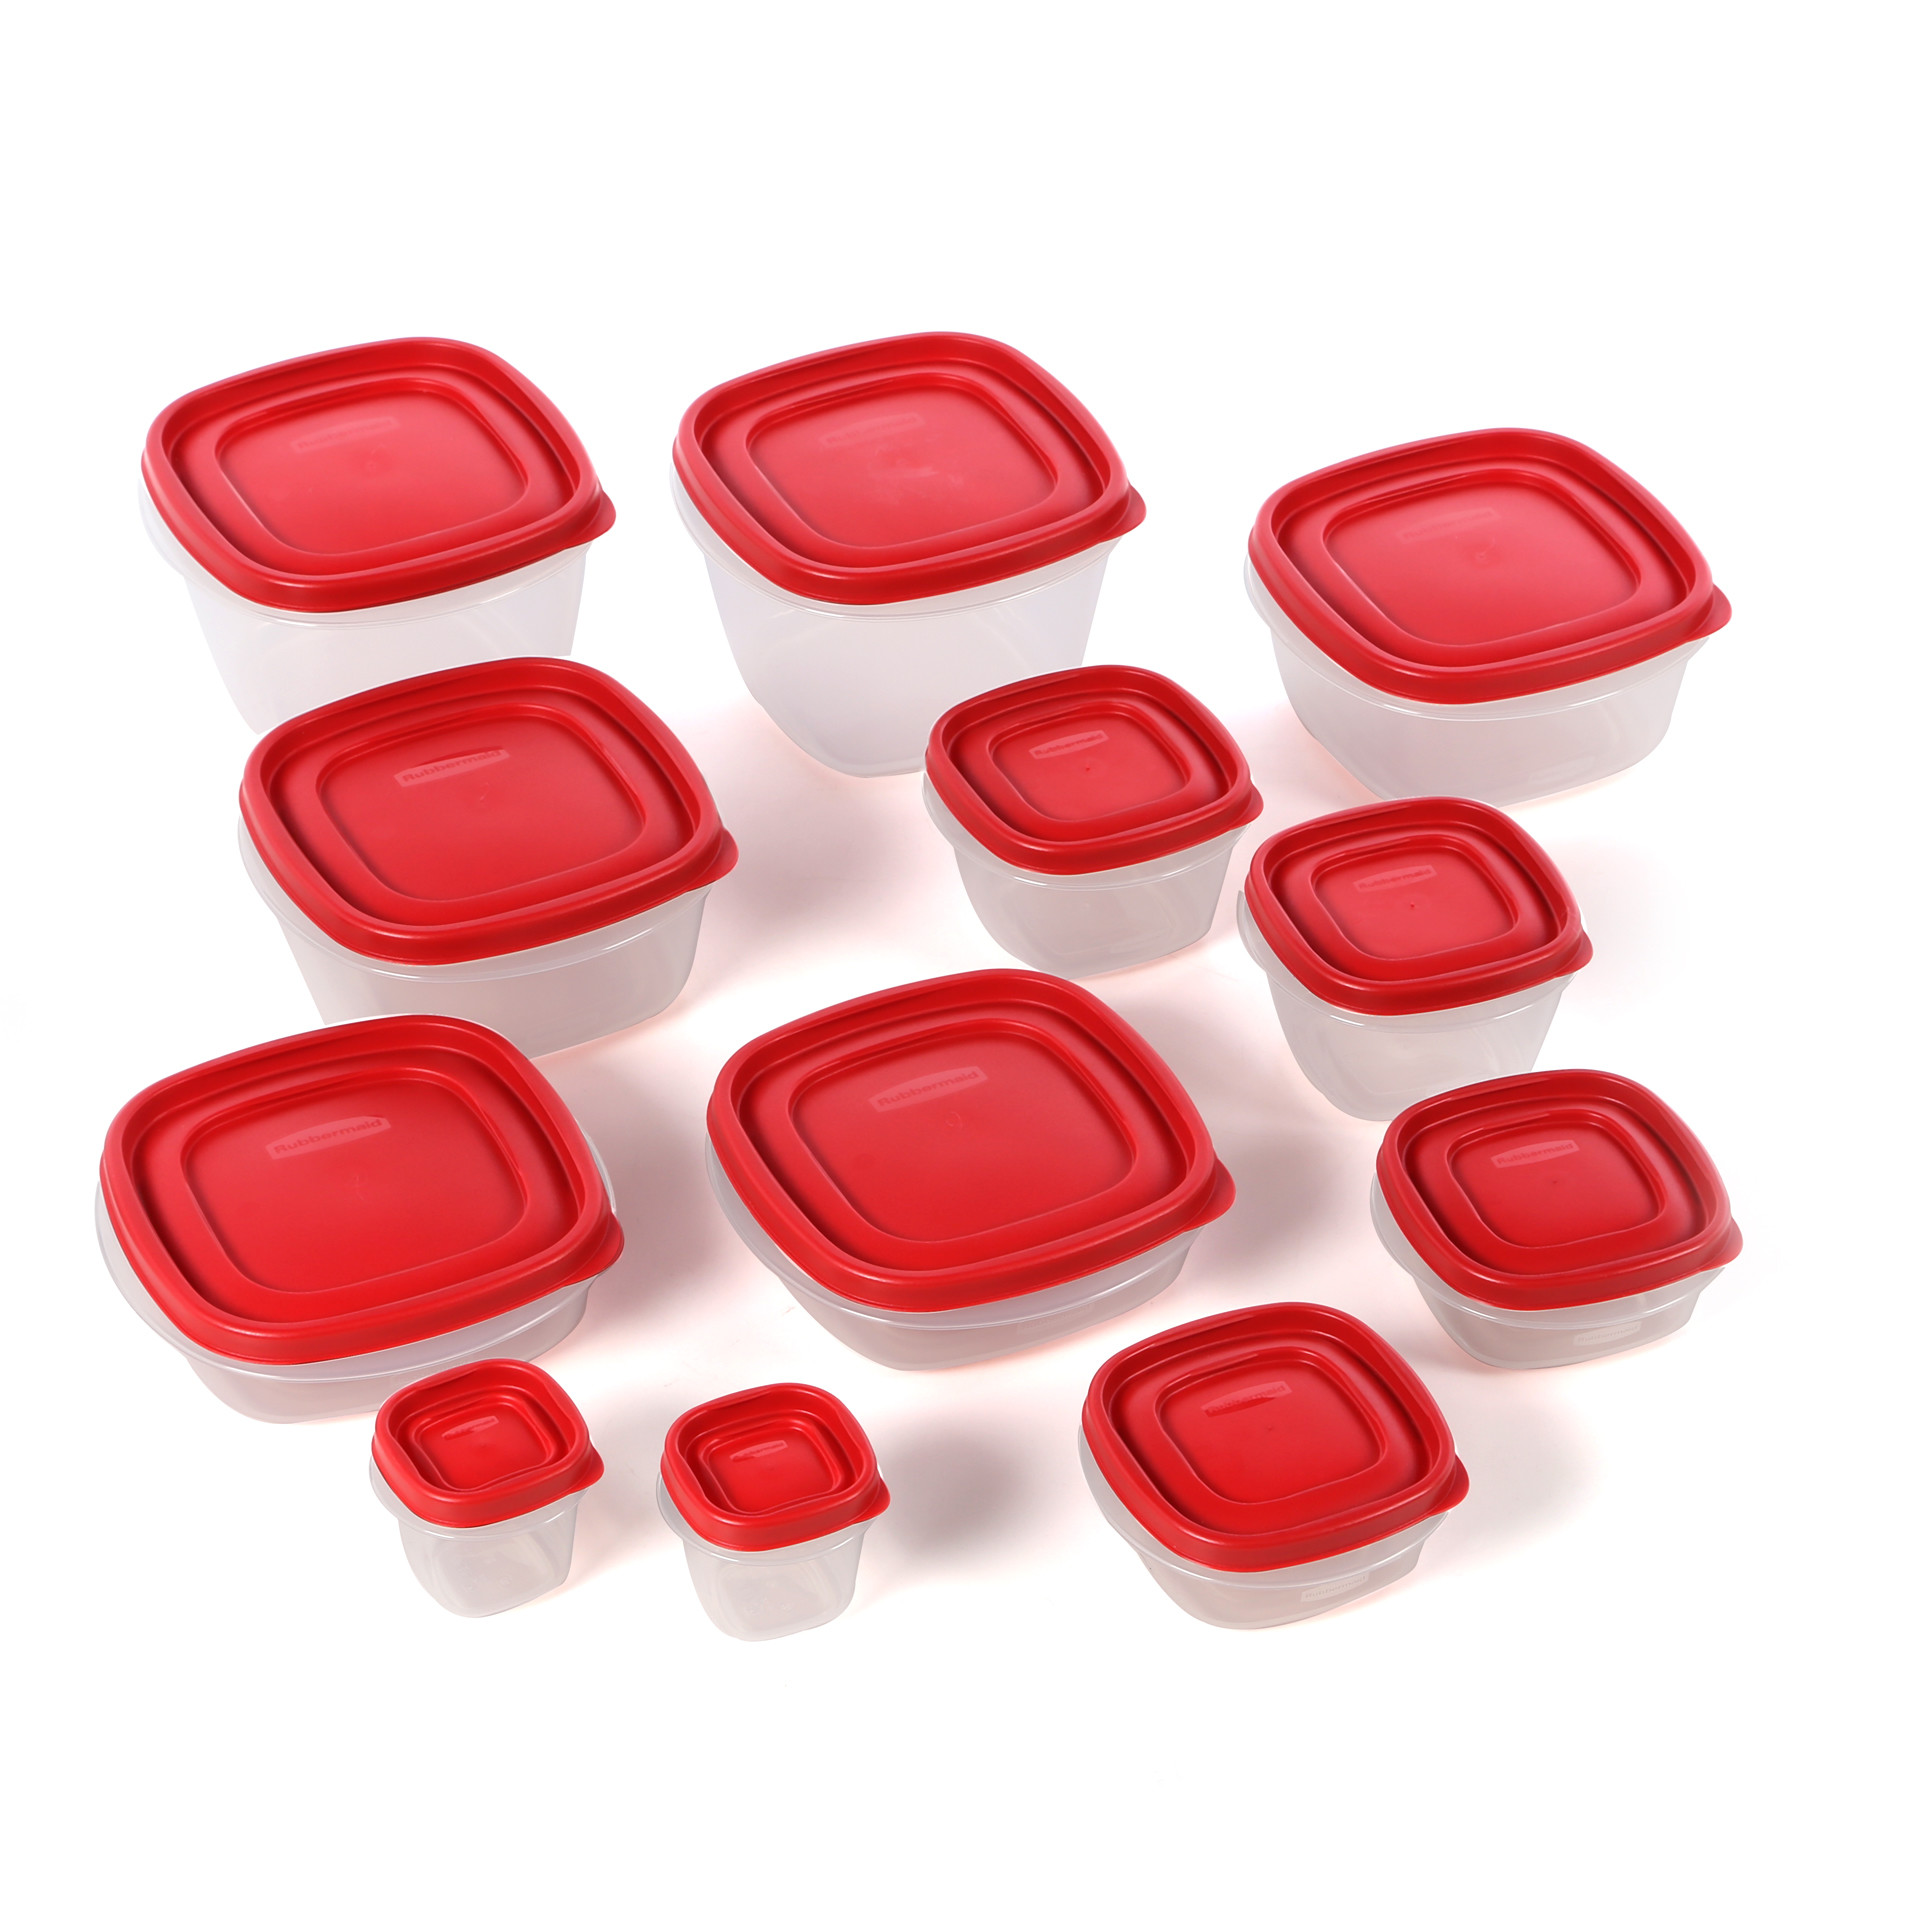 EASYLID 24PC SET RED - image 2 of 3